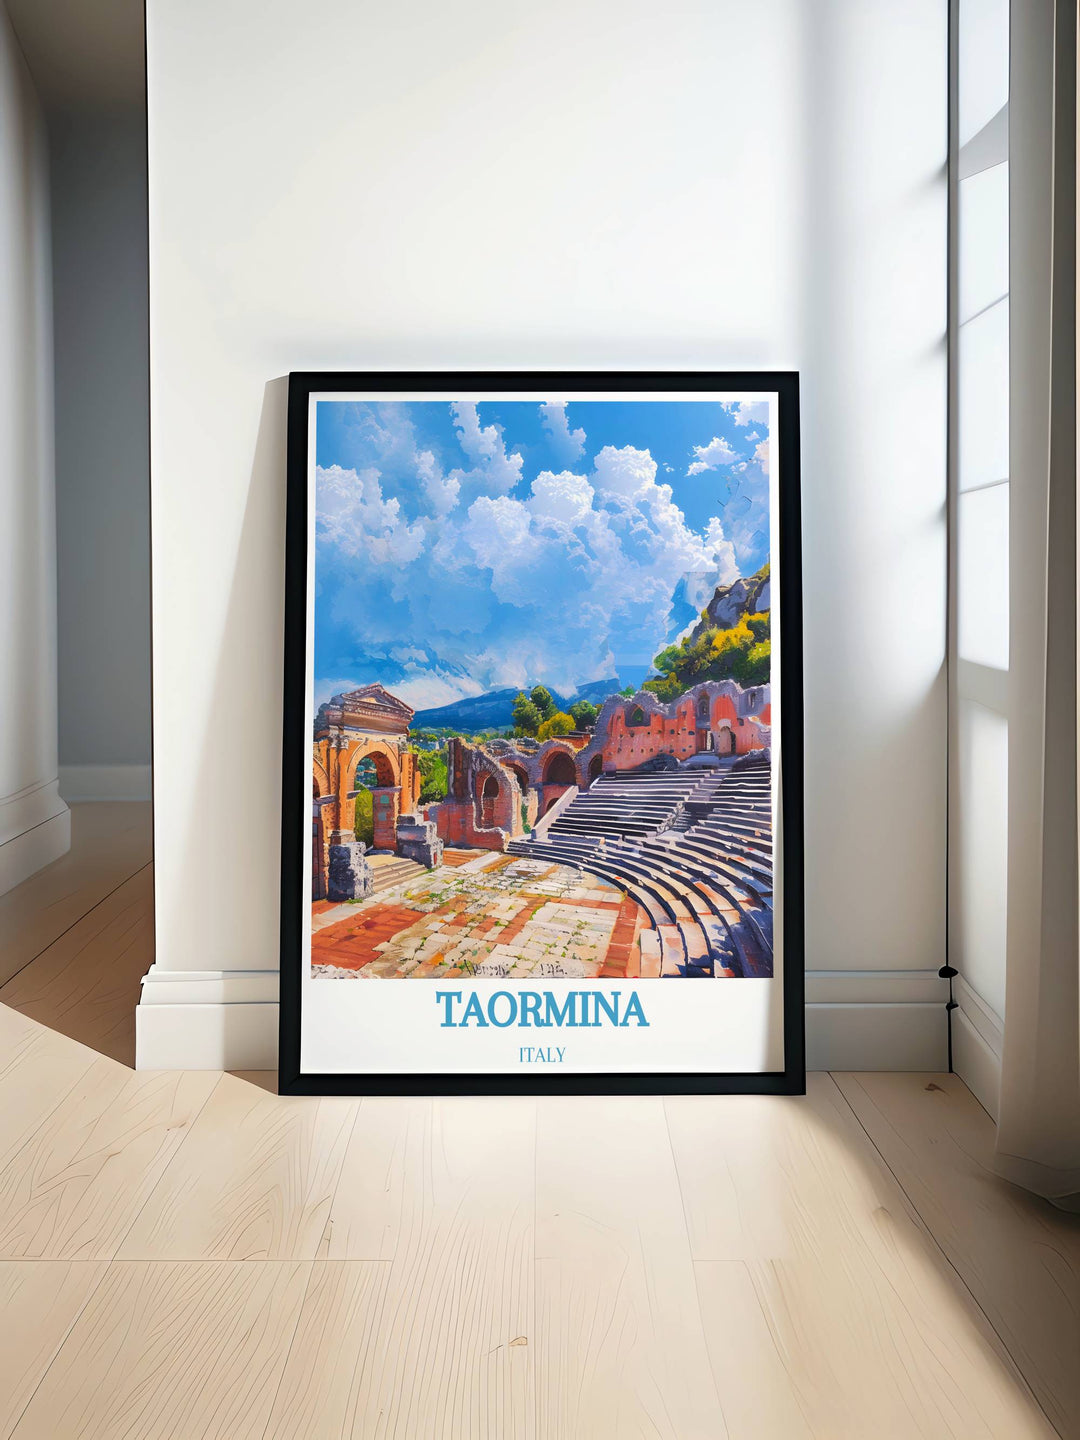 Beautiful Teatro Antico di Taormina print showcasing the ancient Greek theatre with Mount Etna in the background, perfect for adding a touch of Italian history and charm to your home decor.